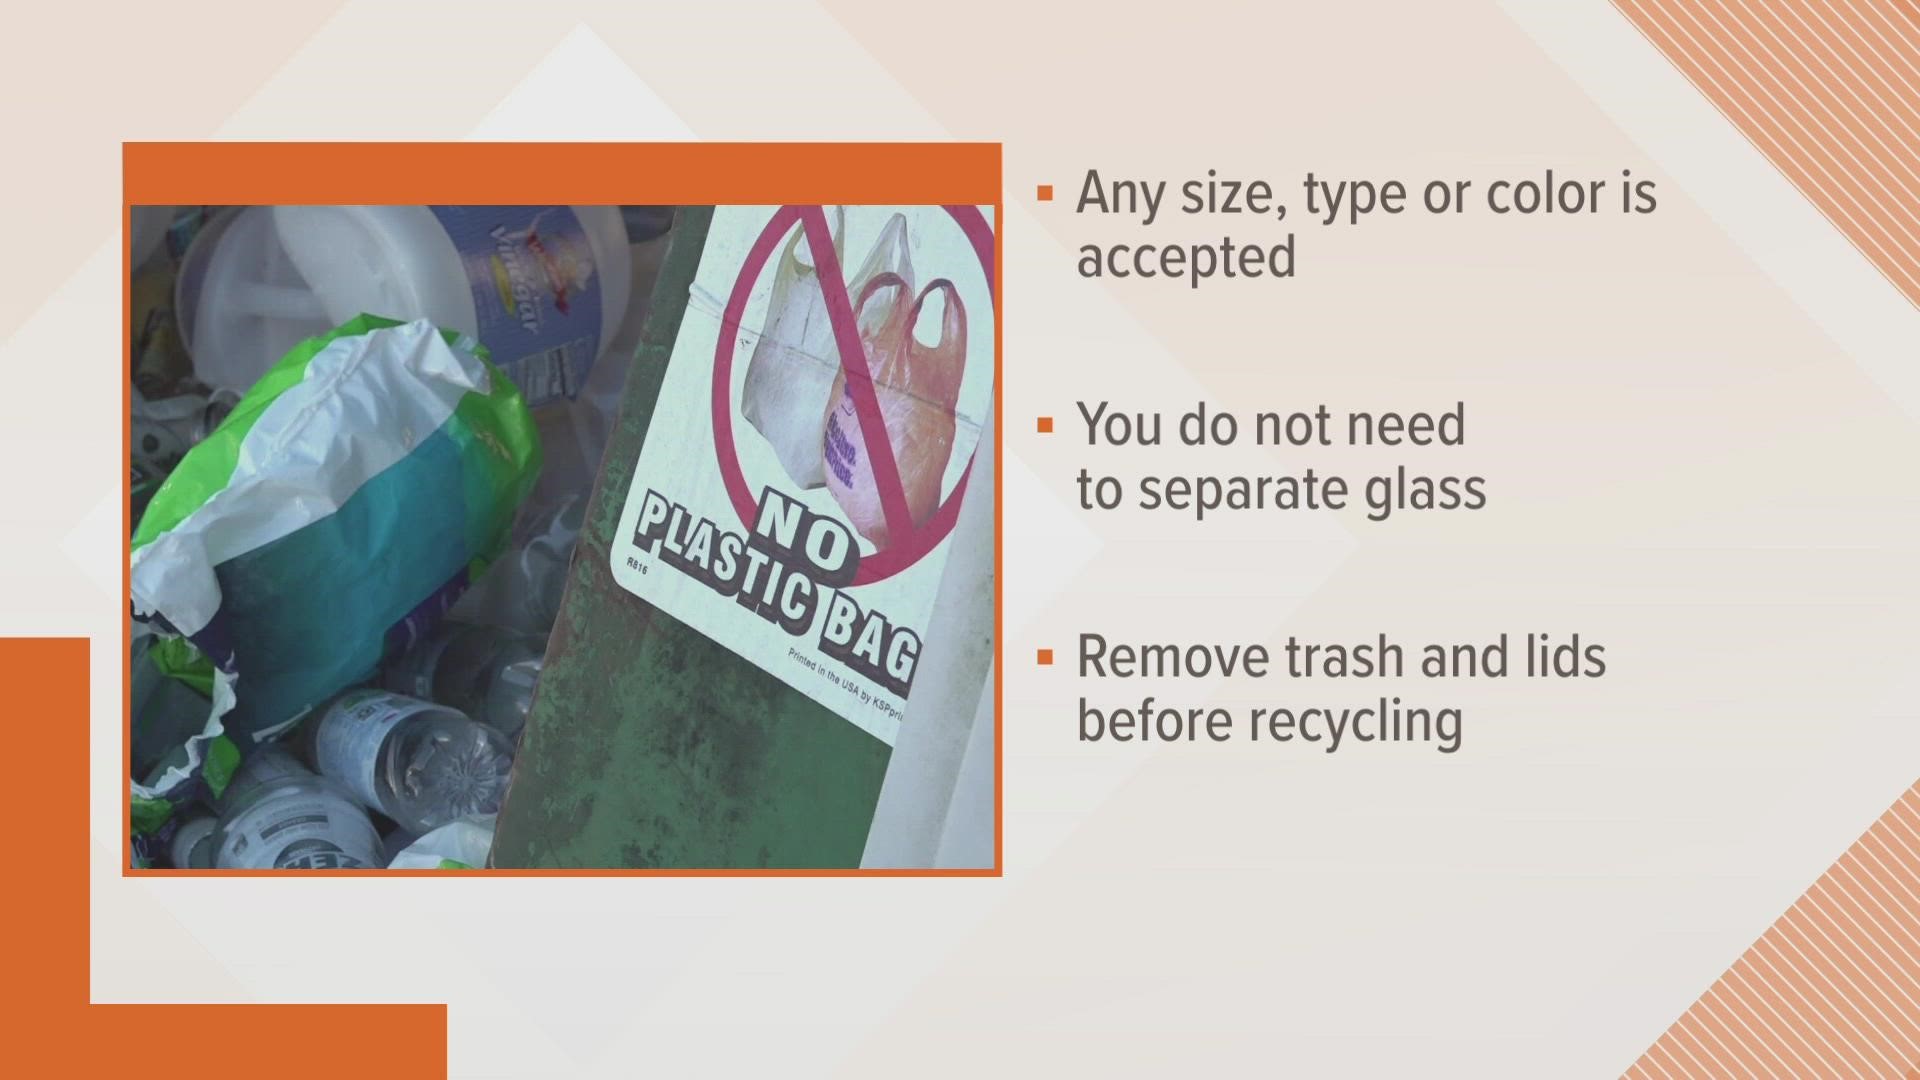 You don't need to separate the glass, but remove trash and lids first.